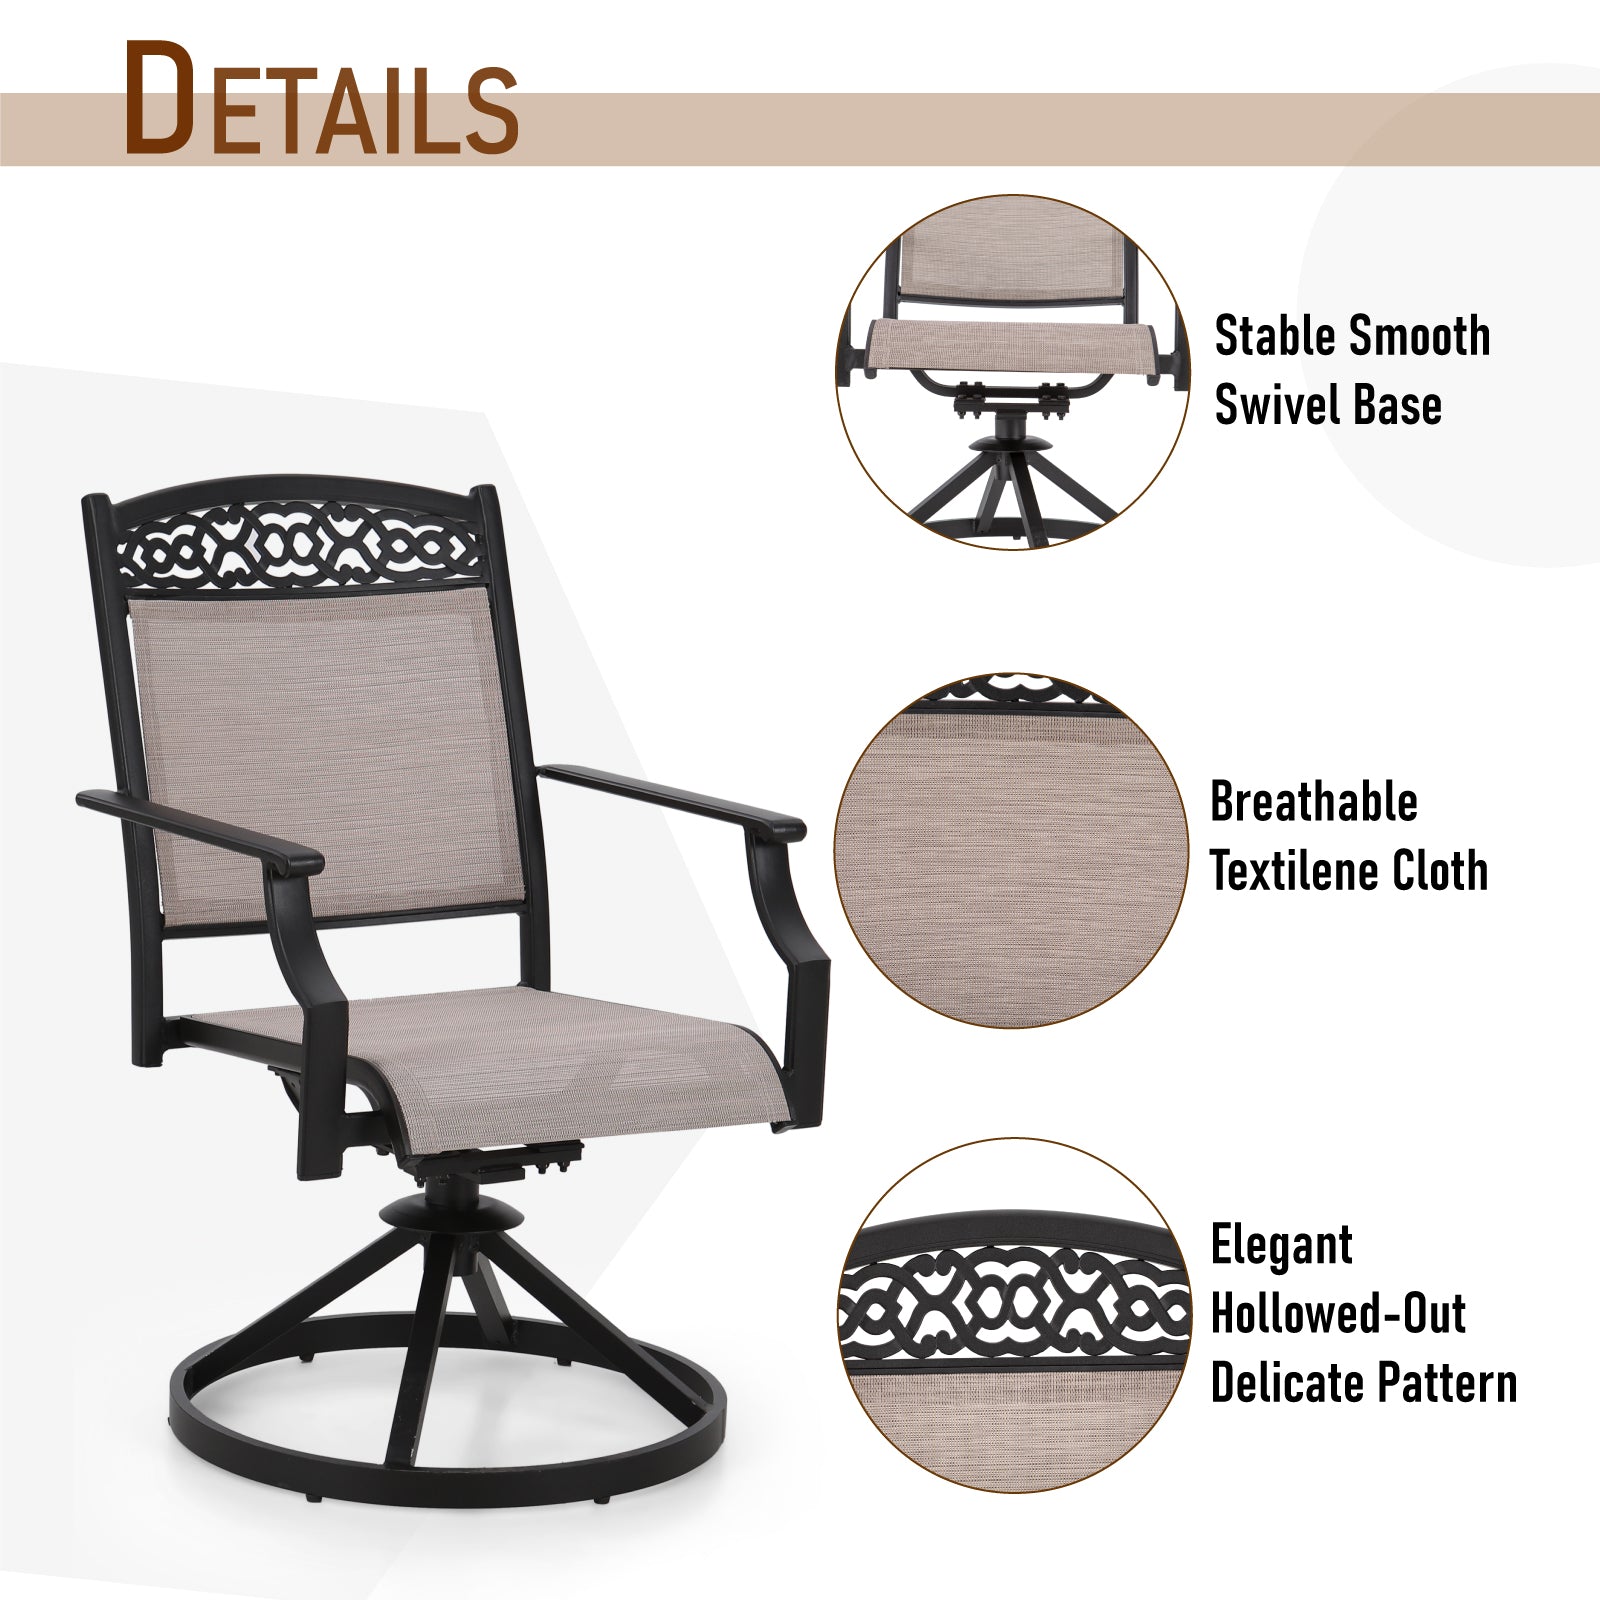 Sophia & William 5-Piece Geometrically Stamped Round Table & Cast Aluminum Pattern Textilene Dining Chairs Dining Chairs Outdoor Dining Set